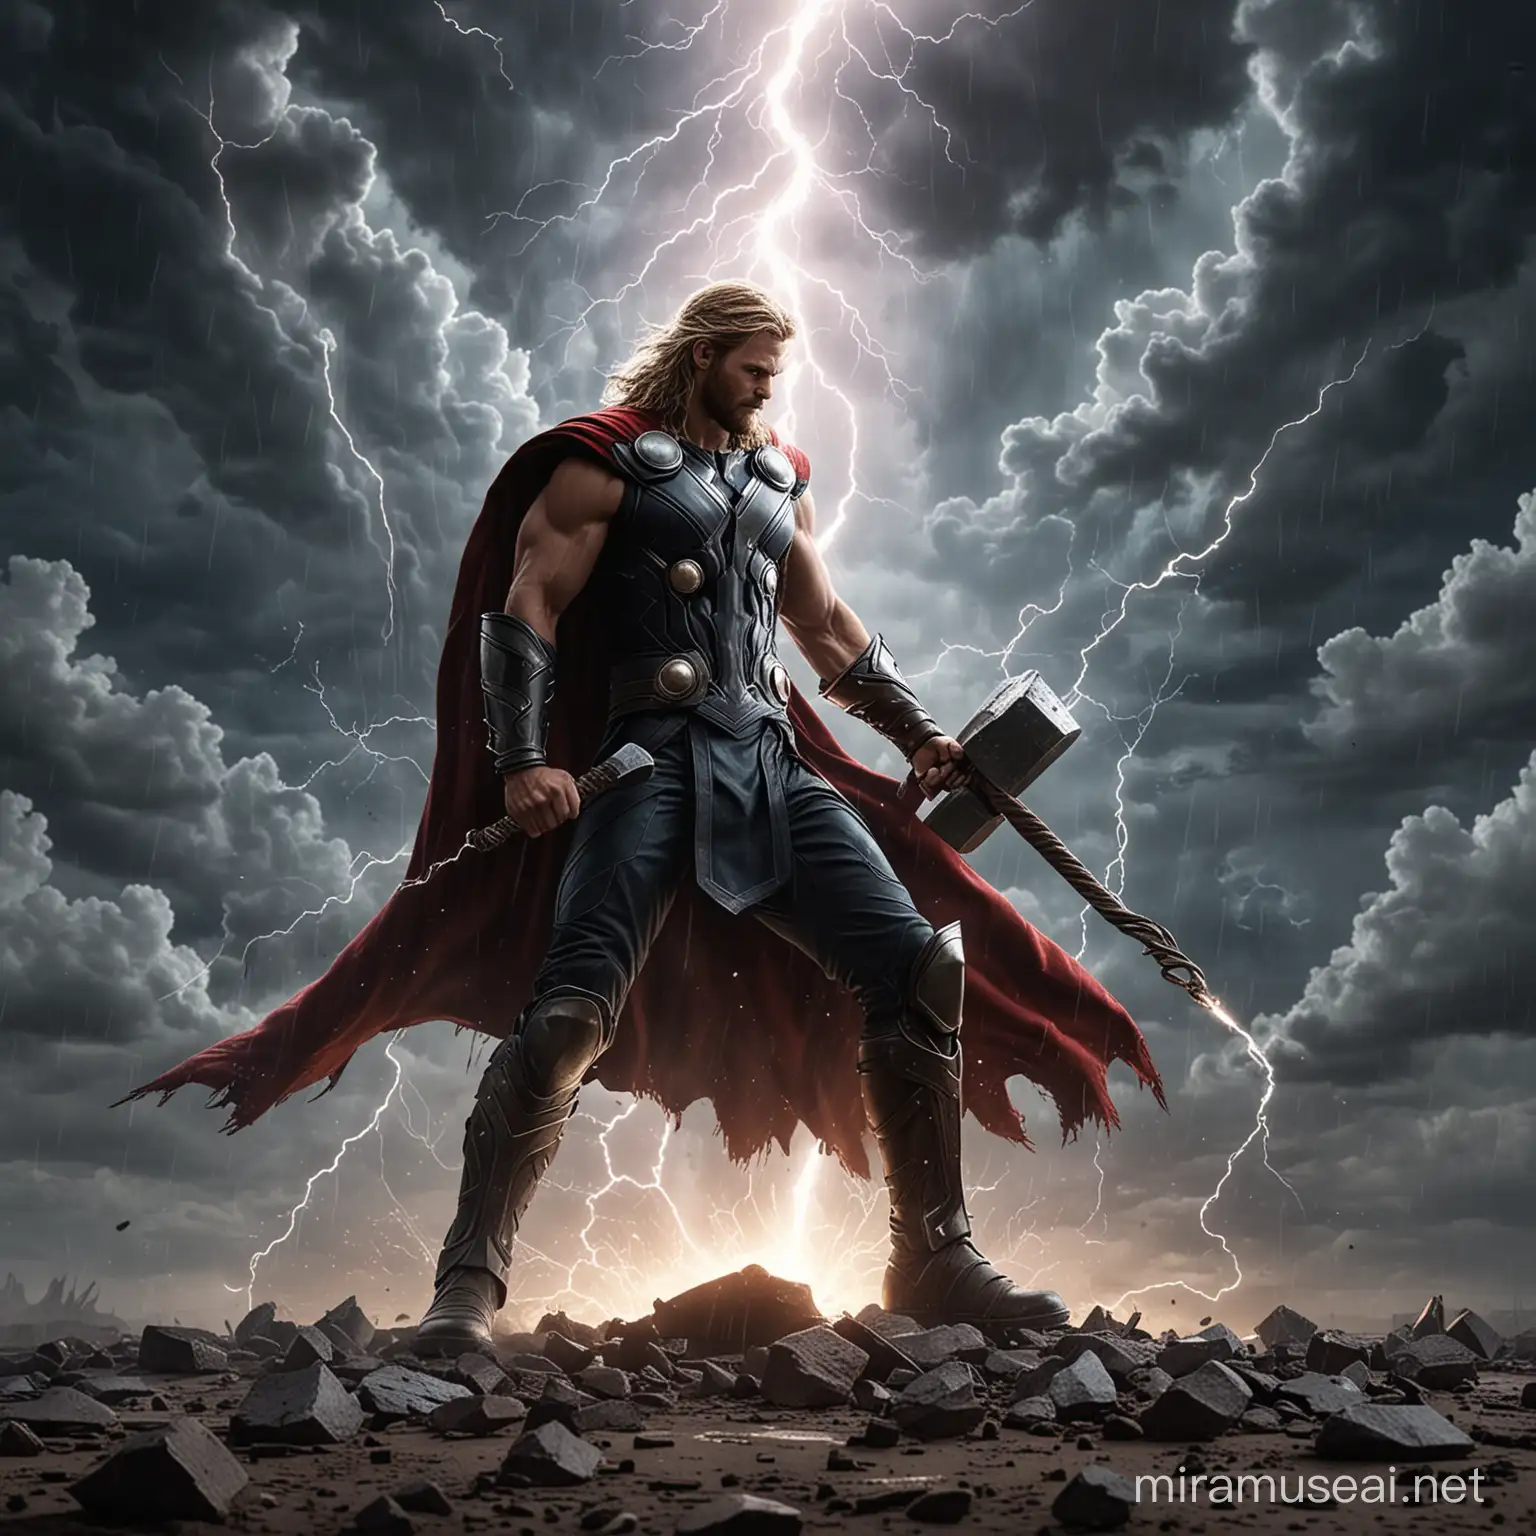 Thor Superhero Scattering Lightning Bolts with Hammer in Hand